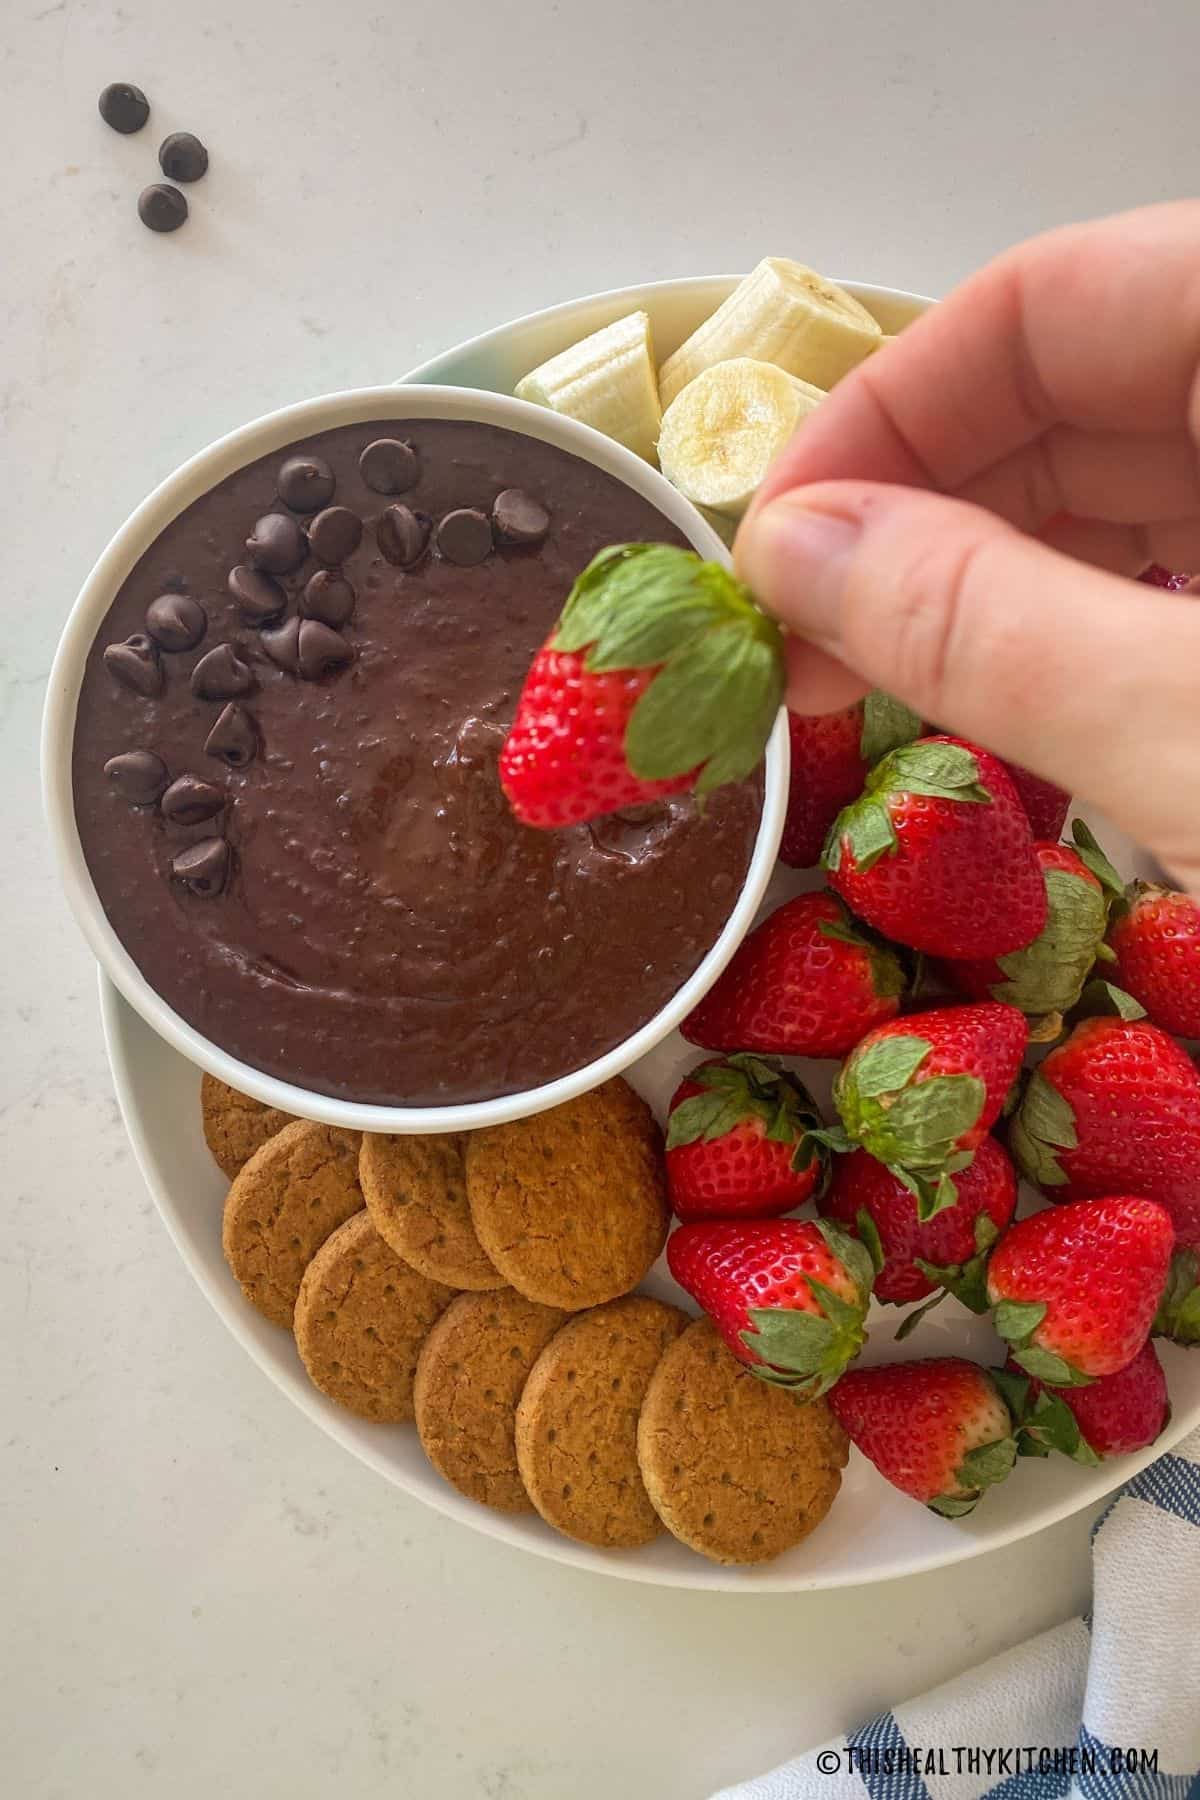 Hand holding strawberry above bowl of chocolate dip.